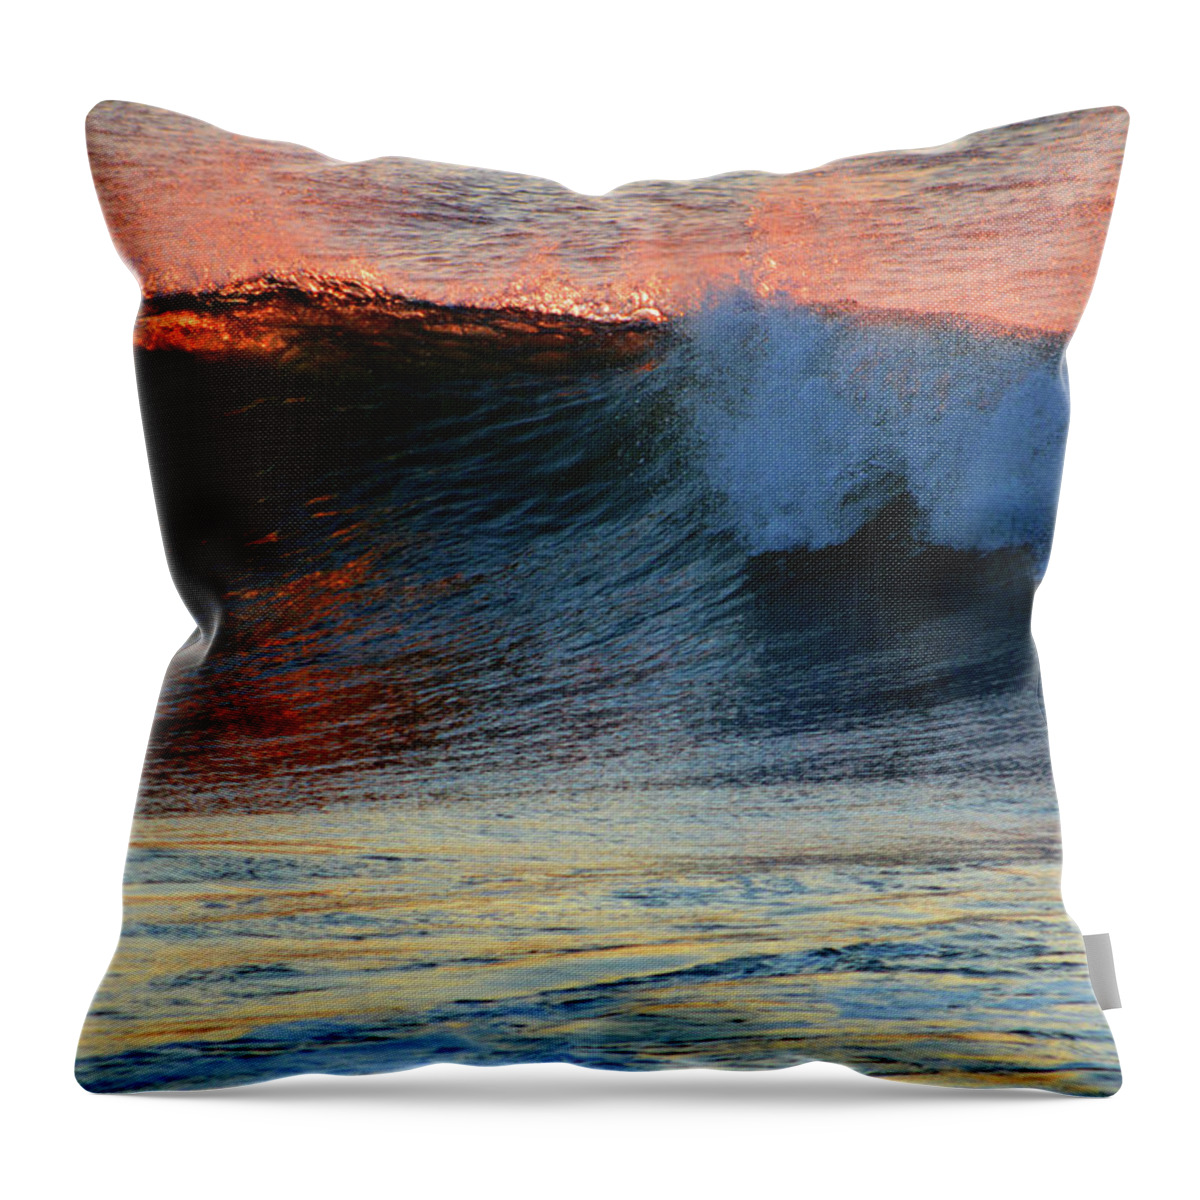 Ocean Throw Pillow featuring the photograph Summer Shine by Dianne Cowen Cape Cod Photography